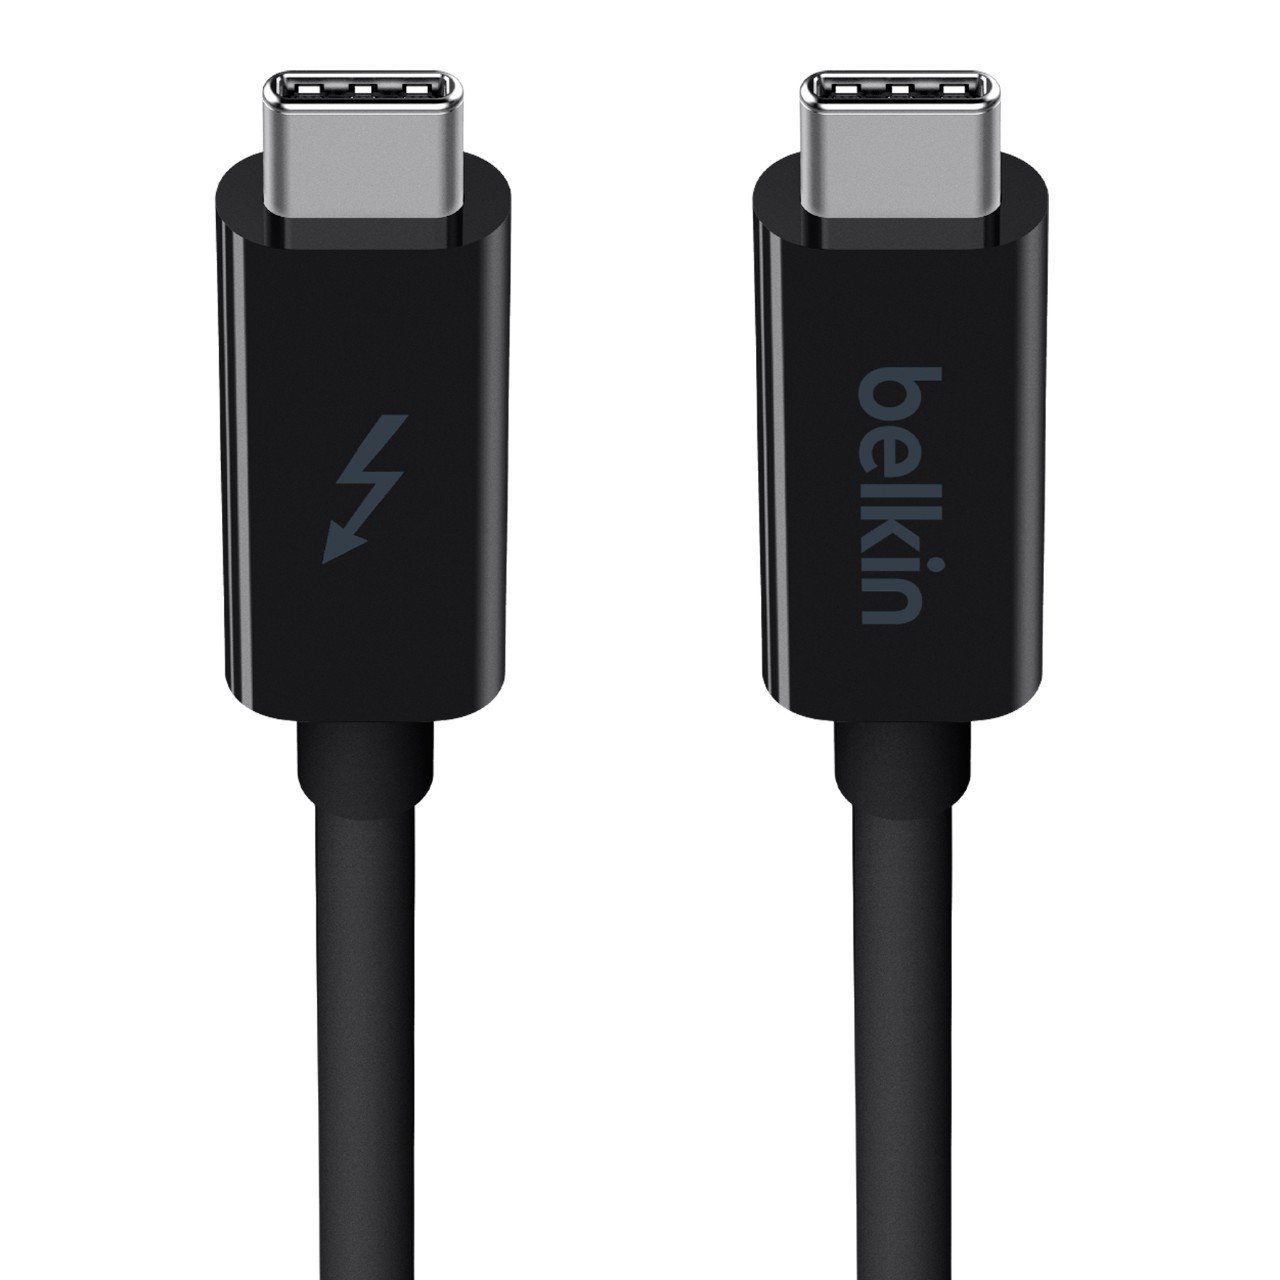 Belkin Thunderbolt 3 USB C to USB C 3.3ft/1M Long Data Transfer Power Cable with 20 Gbps Data Transfer Speed & Up To 10 Gbps for USB3.1 Devices - Supporting Thunderbolt, 4K & Ultra HD Display (Black)